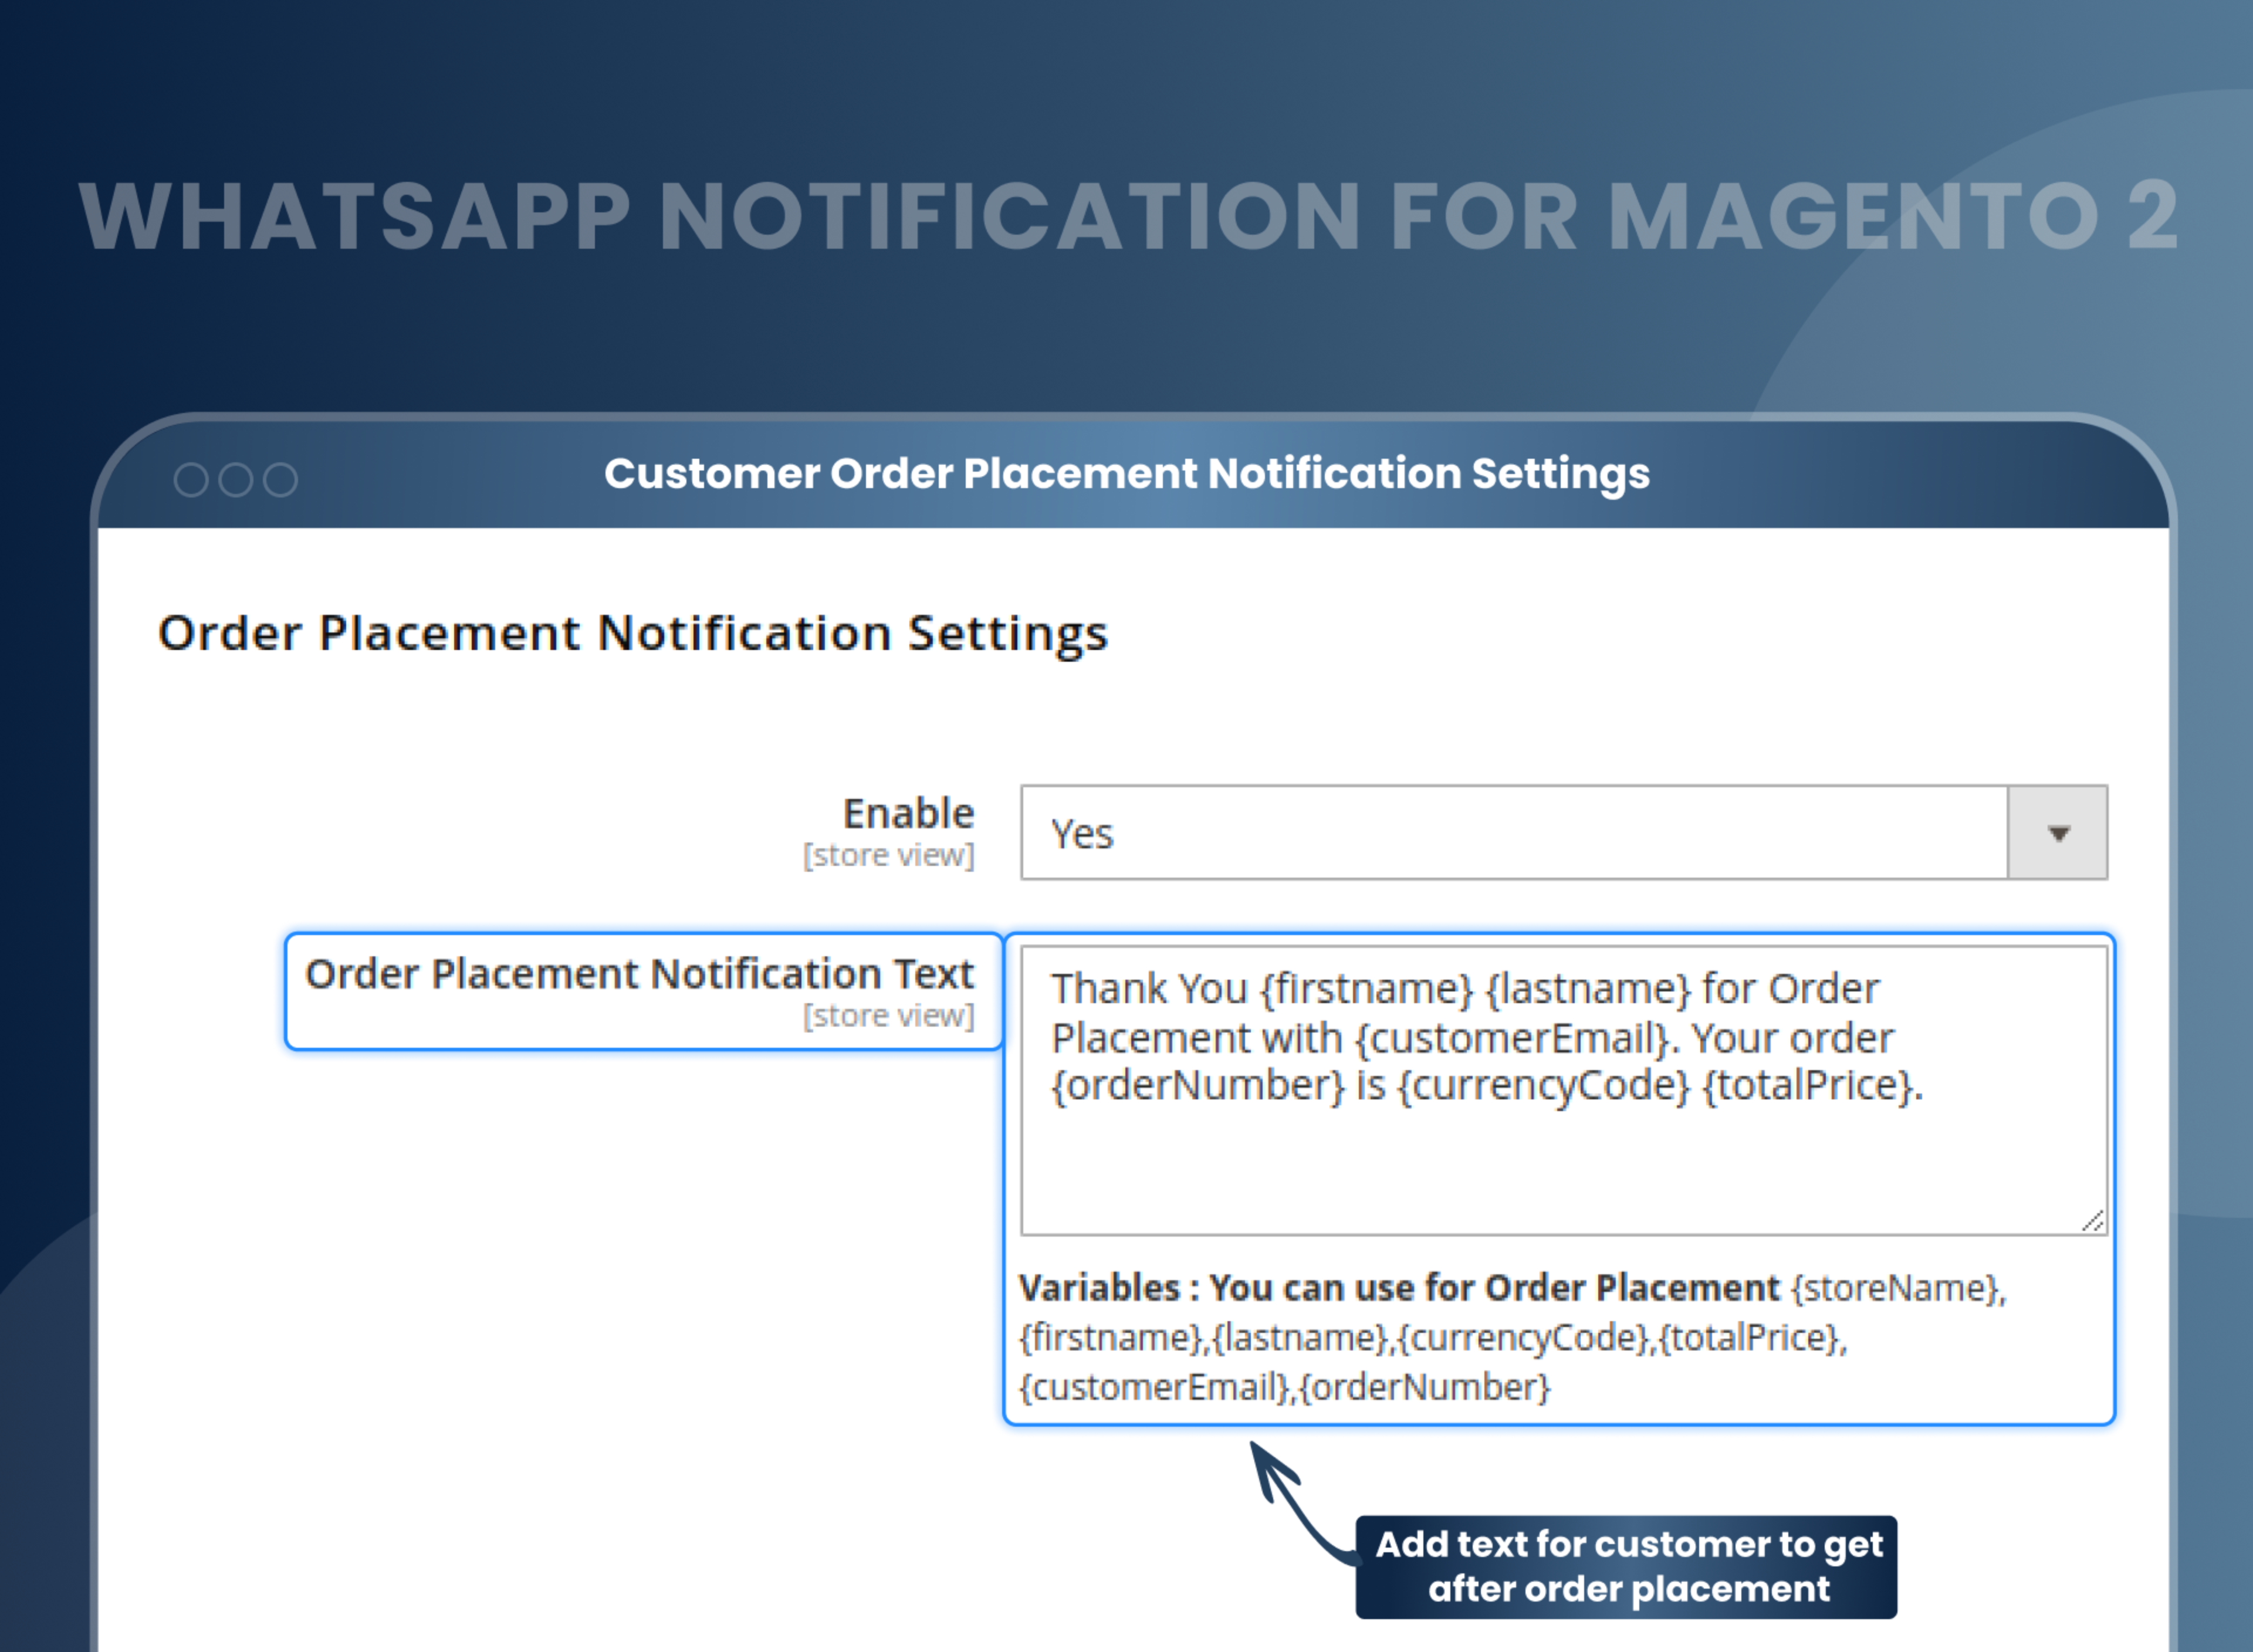 Customer Order Placement Notification Settings 